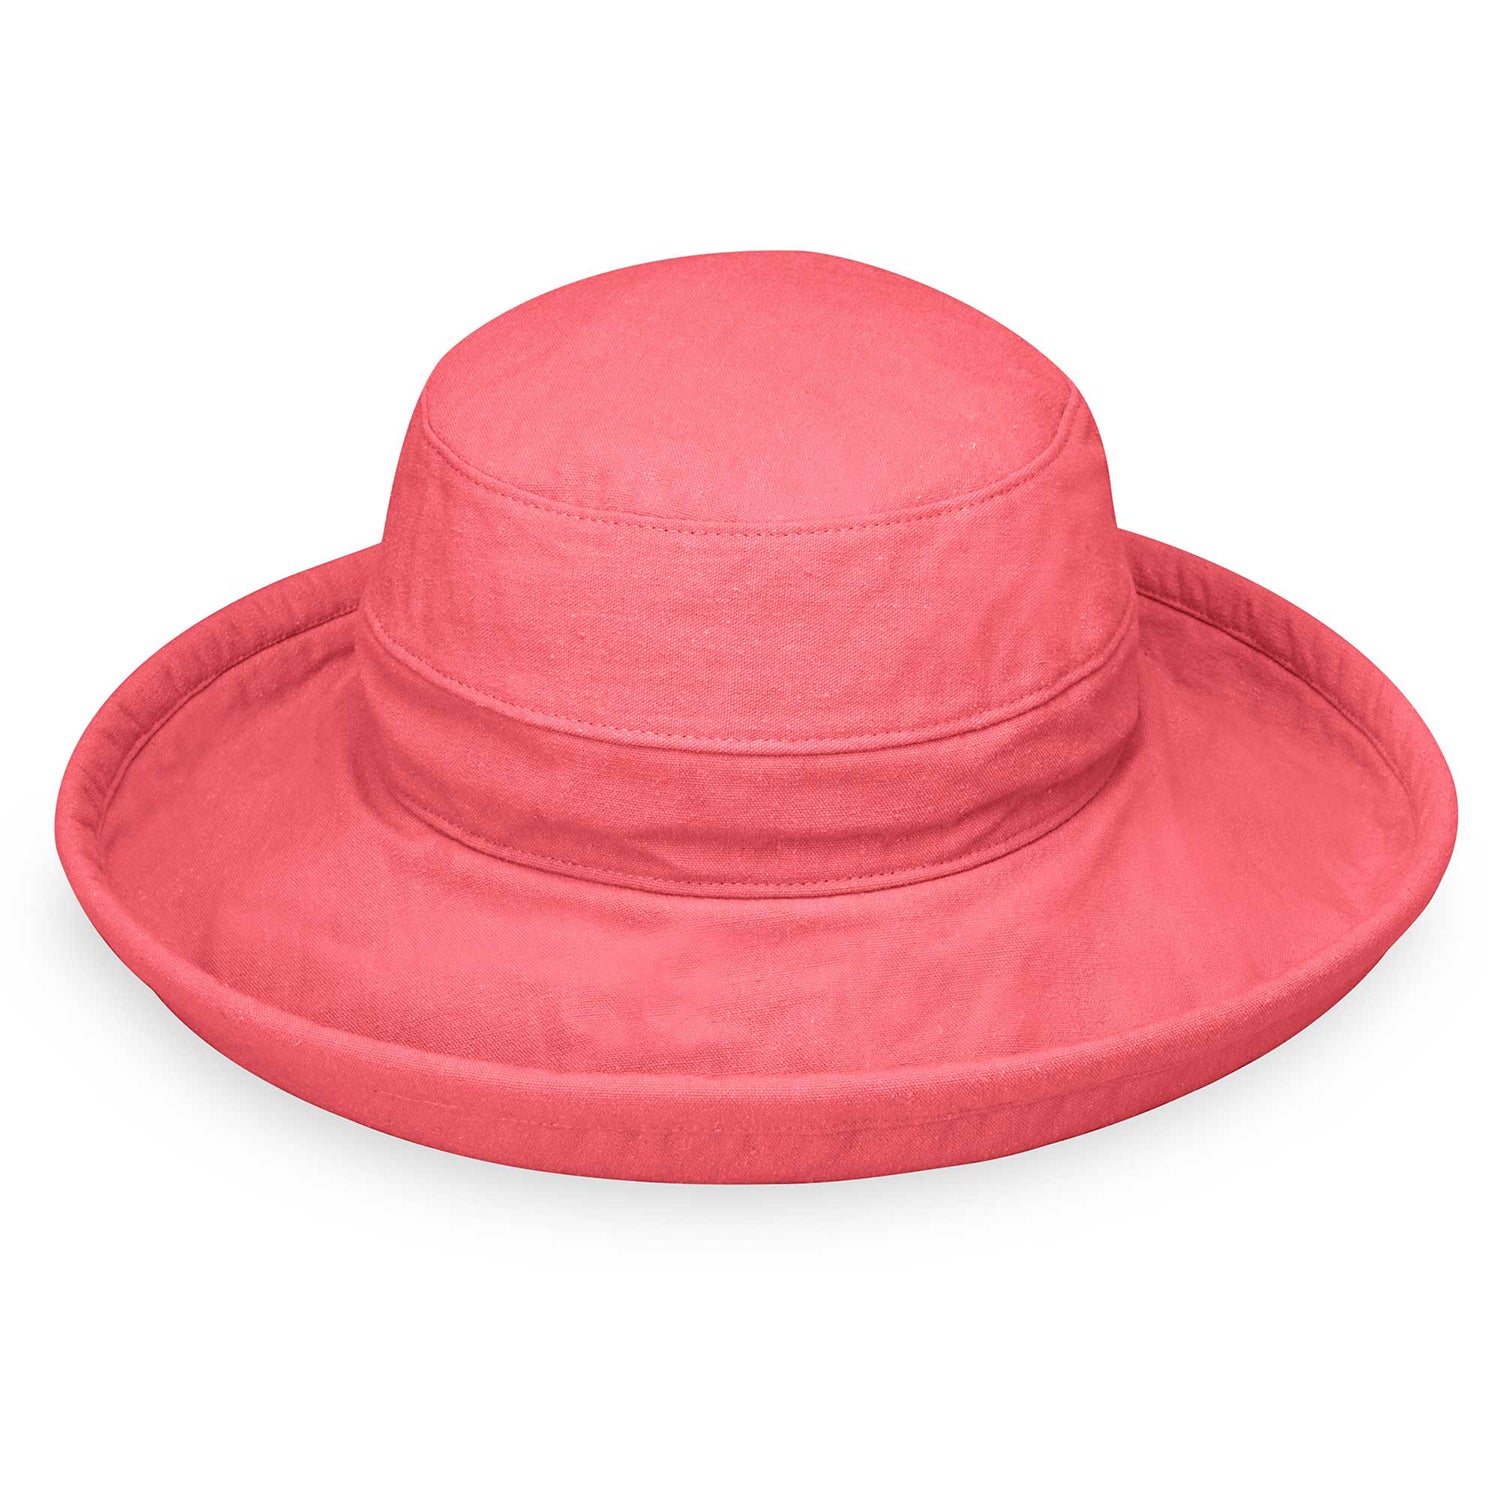 Featuring Women's canvas summer sun hat in coral made with packable, UPF 50 rating material